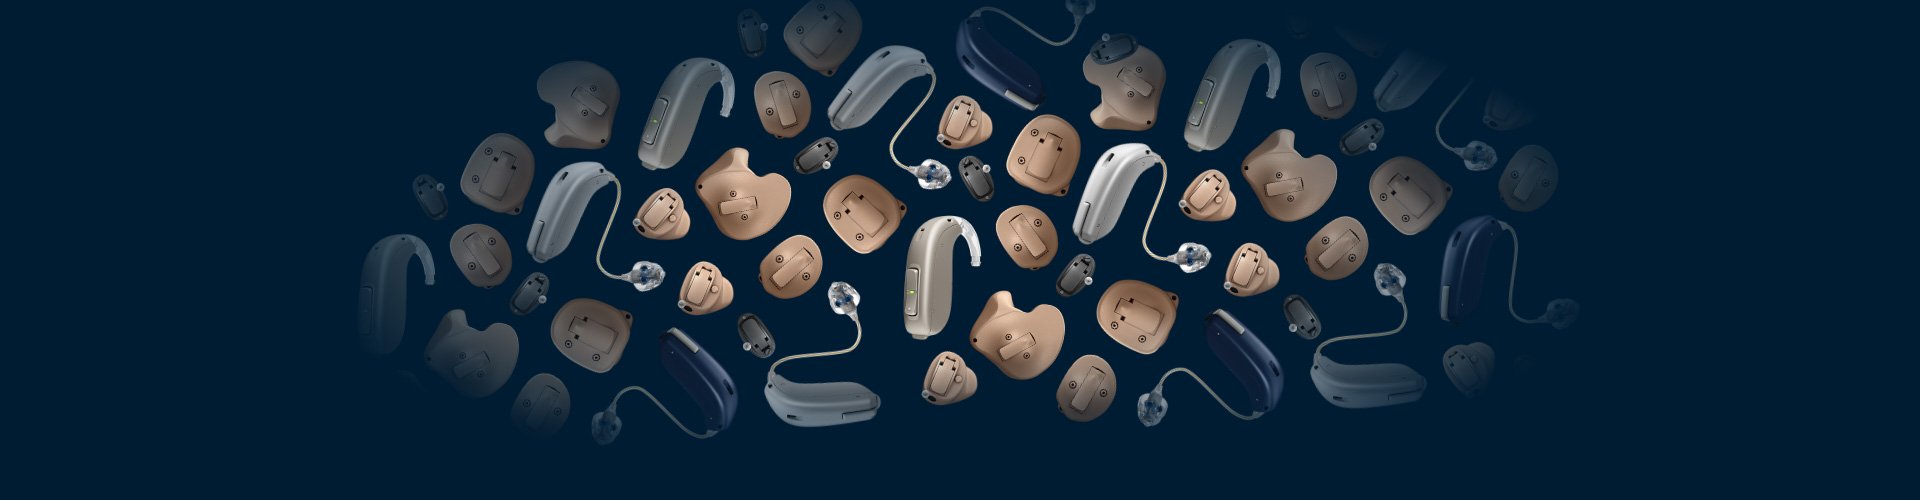 Image shows many hearing aids to choose from to find the best hearing aids